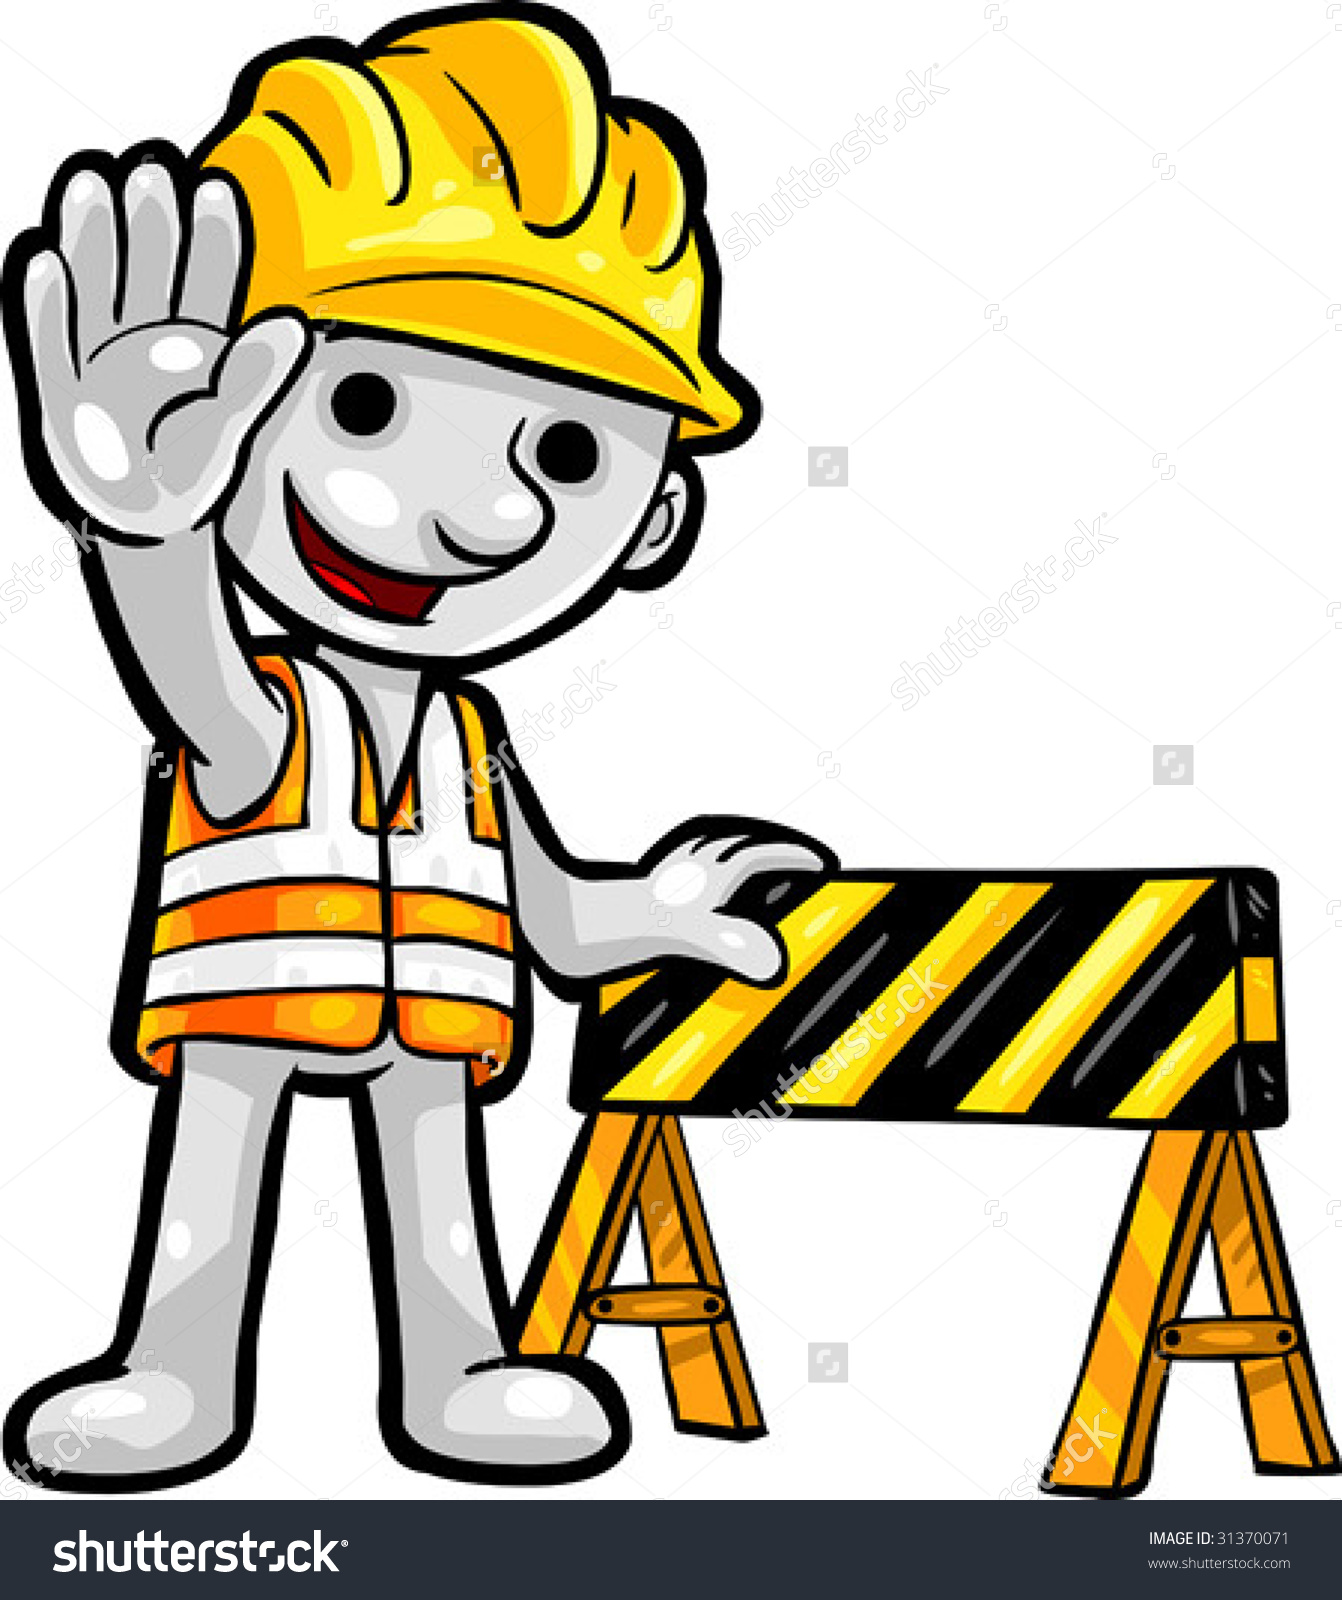 construction worker clipart graphics - photo #50